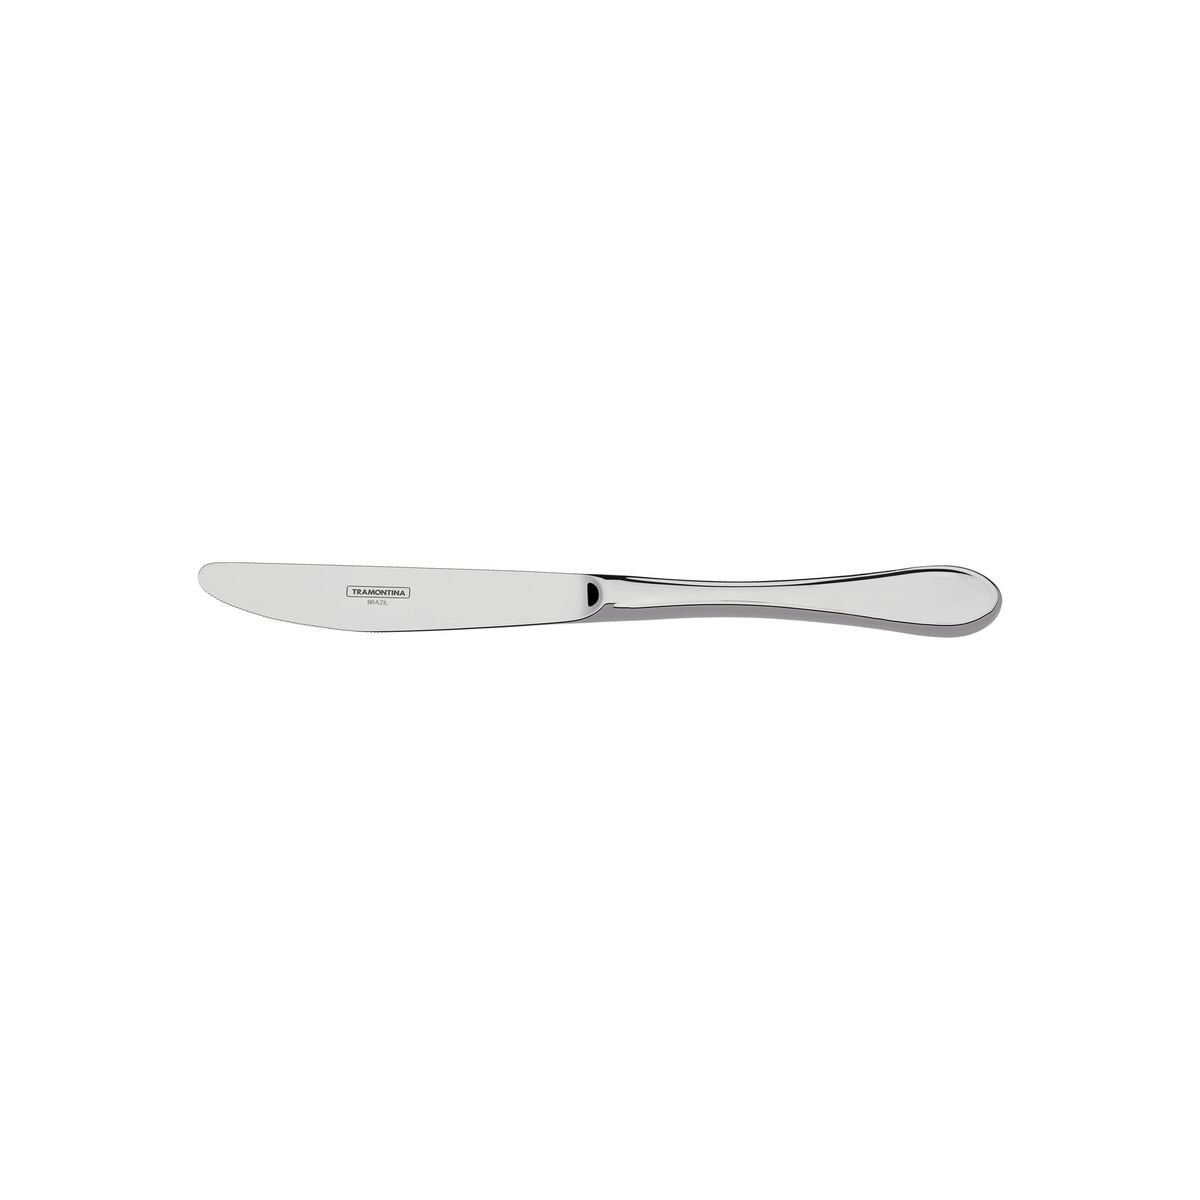 Tramontina Italy stainless steel fruit knife